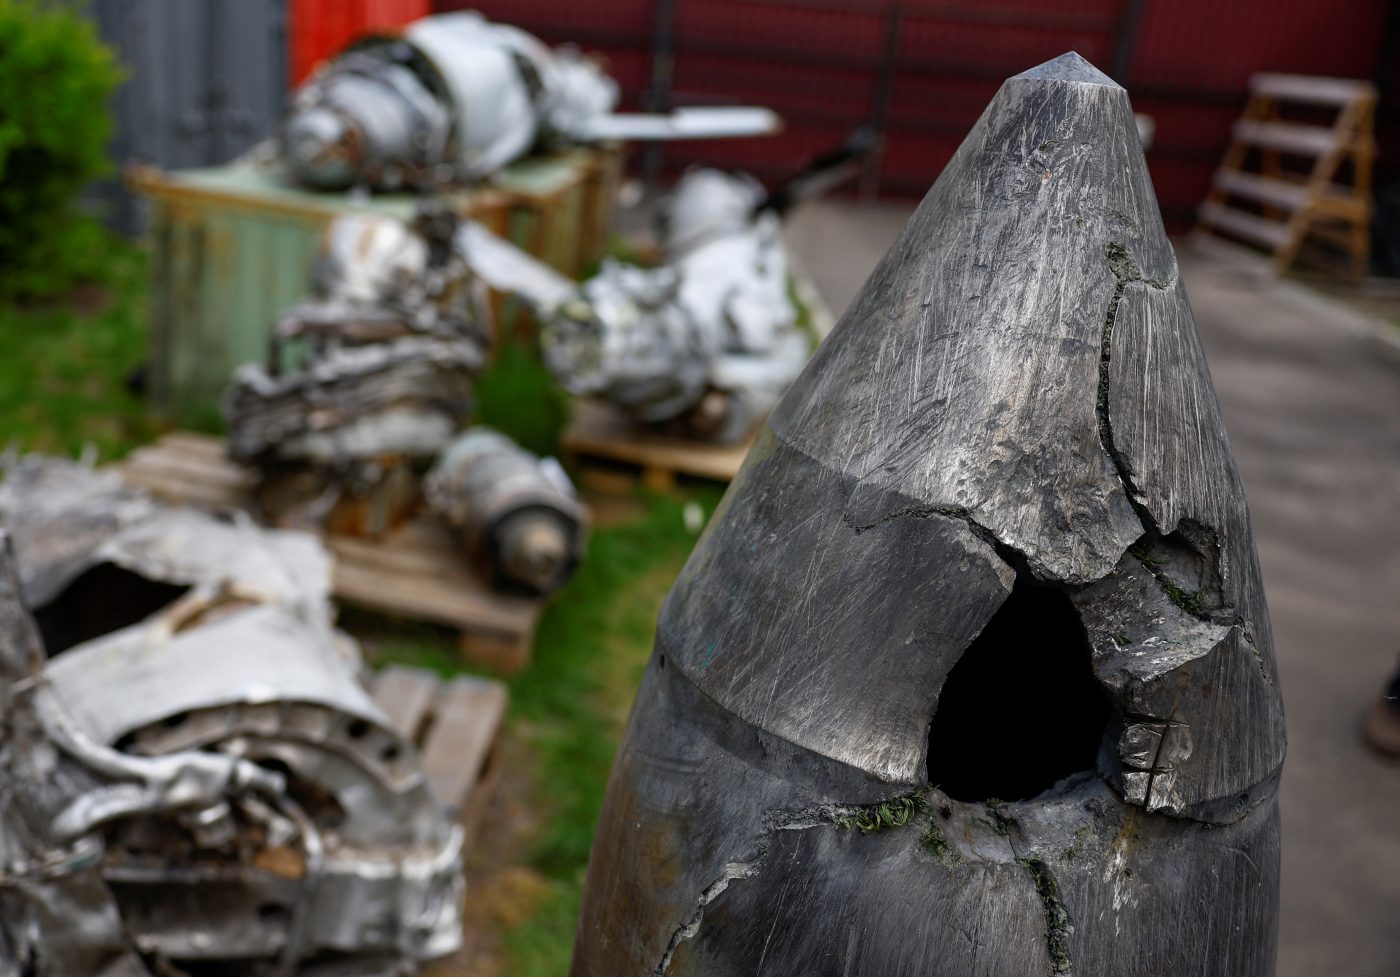 Photo: A Kh-47 Kinzhal Russian hypersonic missile warhead, shot down by a Ukrainian Air Defence unit amid Russia's attack on Ukraine, is seen at a compound of the Scientific Research Institute in Kyiv, Ukraine May 12, 2023. Credit" REUTERS/Valentyn Ogirenko